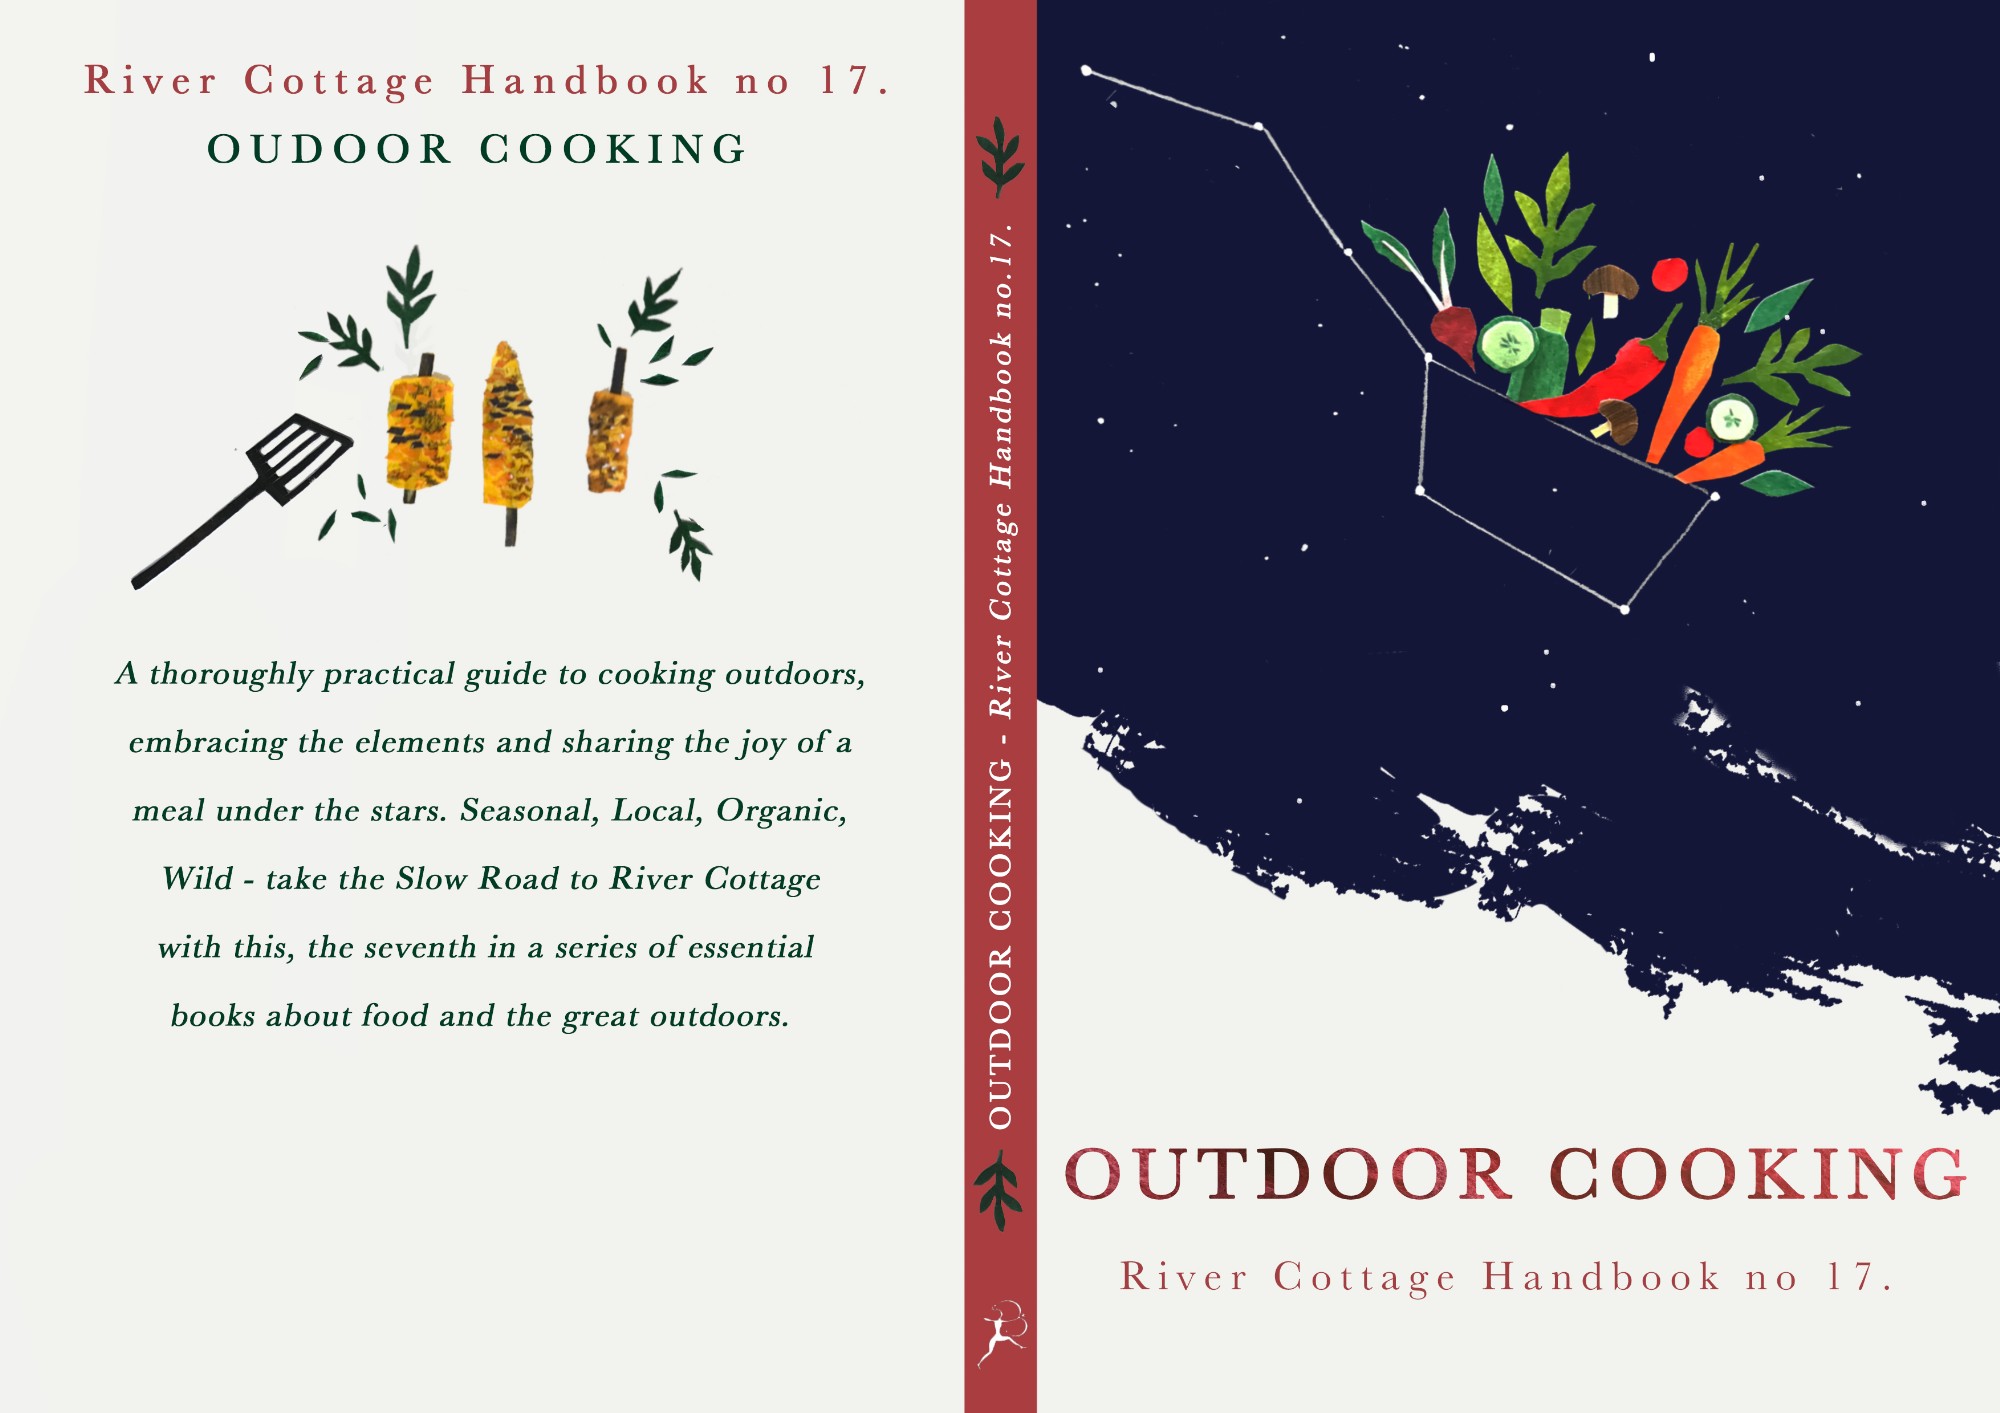 Speculative cookery book cover design, based on cooking and eating outdoors.